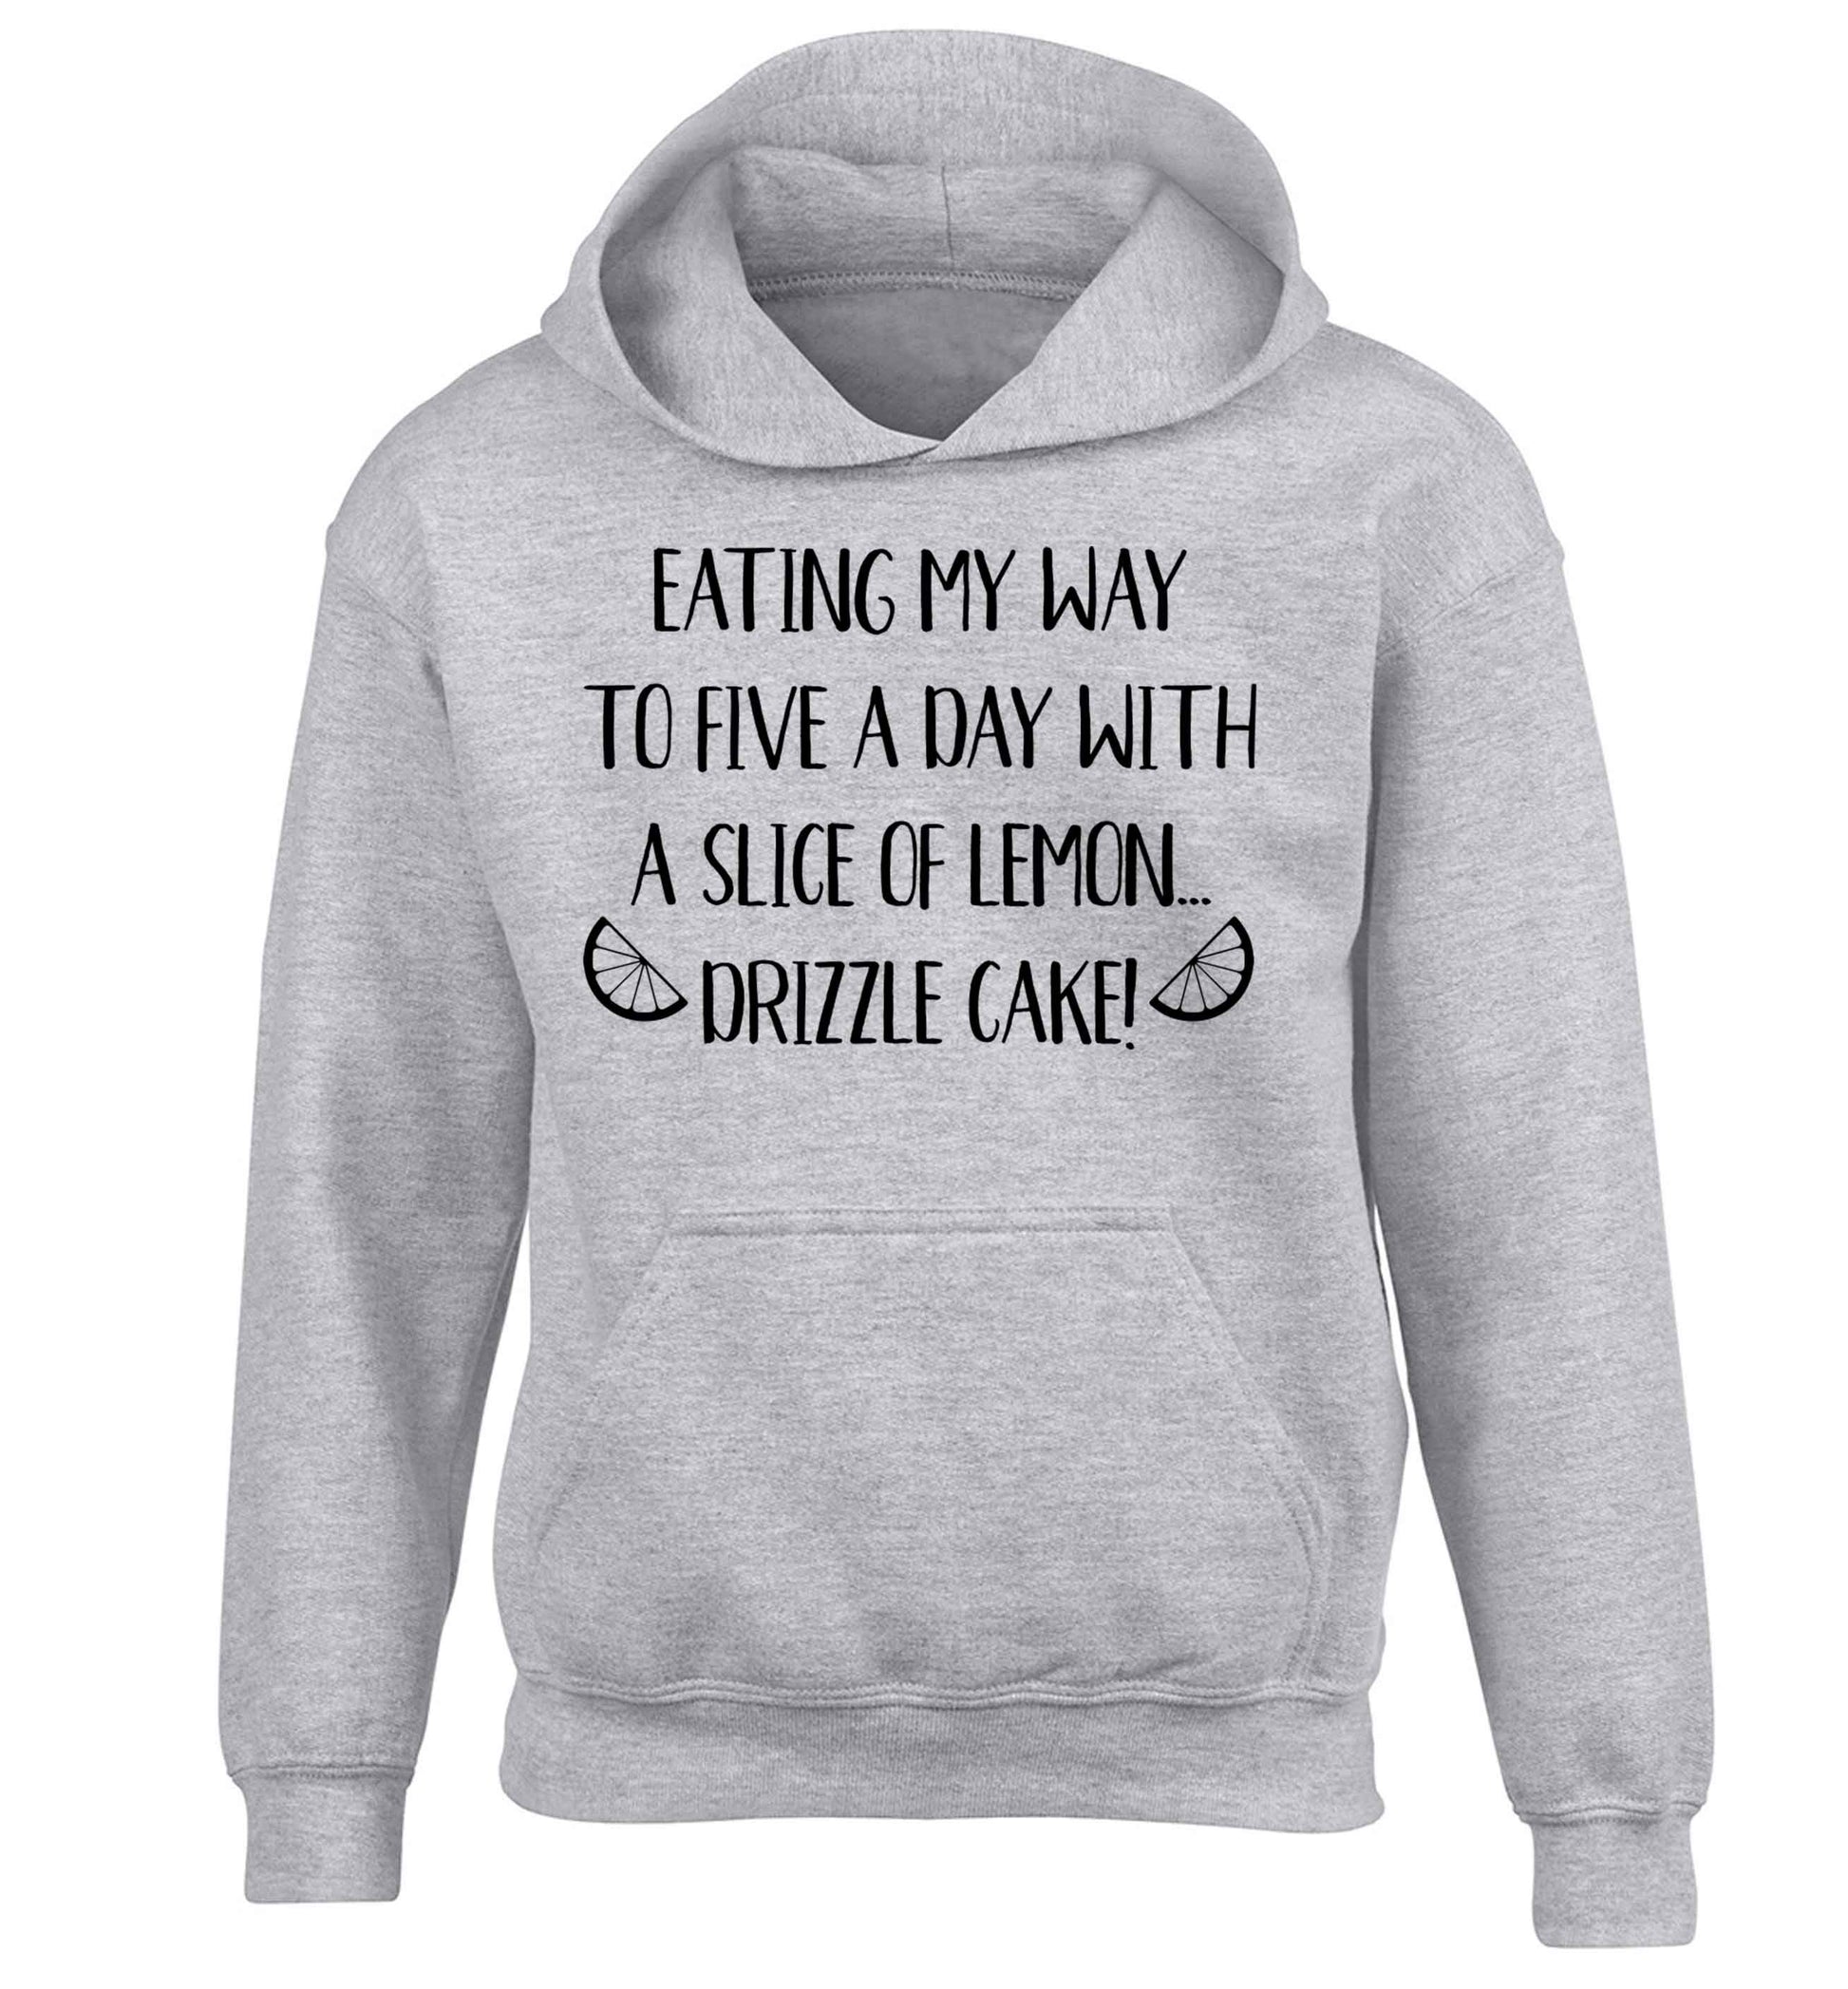 Eating my way to five a day with a slice of lemon drizzle cake day children's grey hoodie 12-13 Years